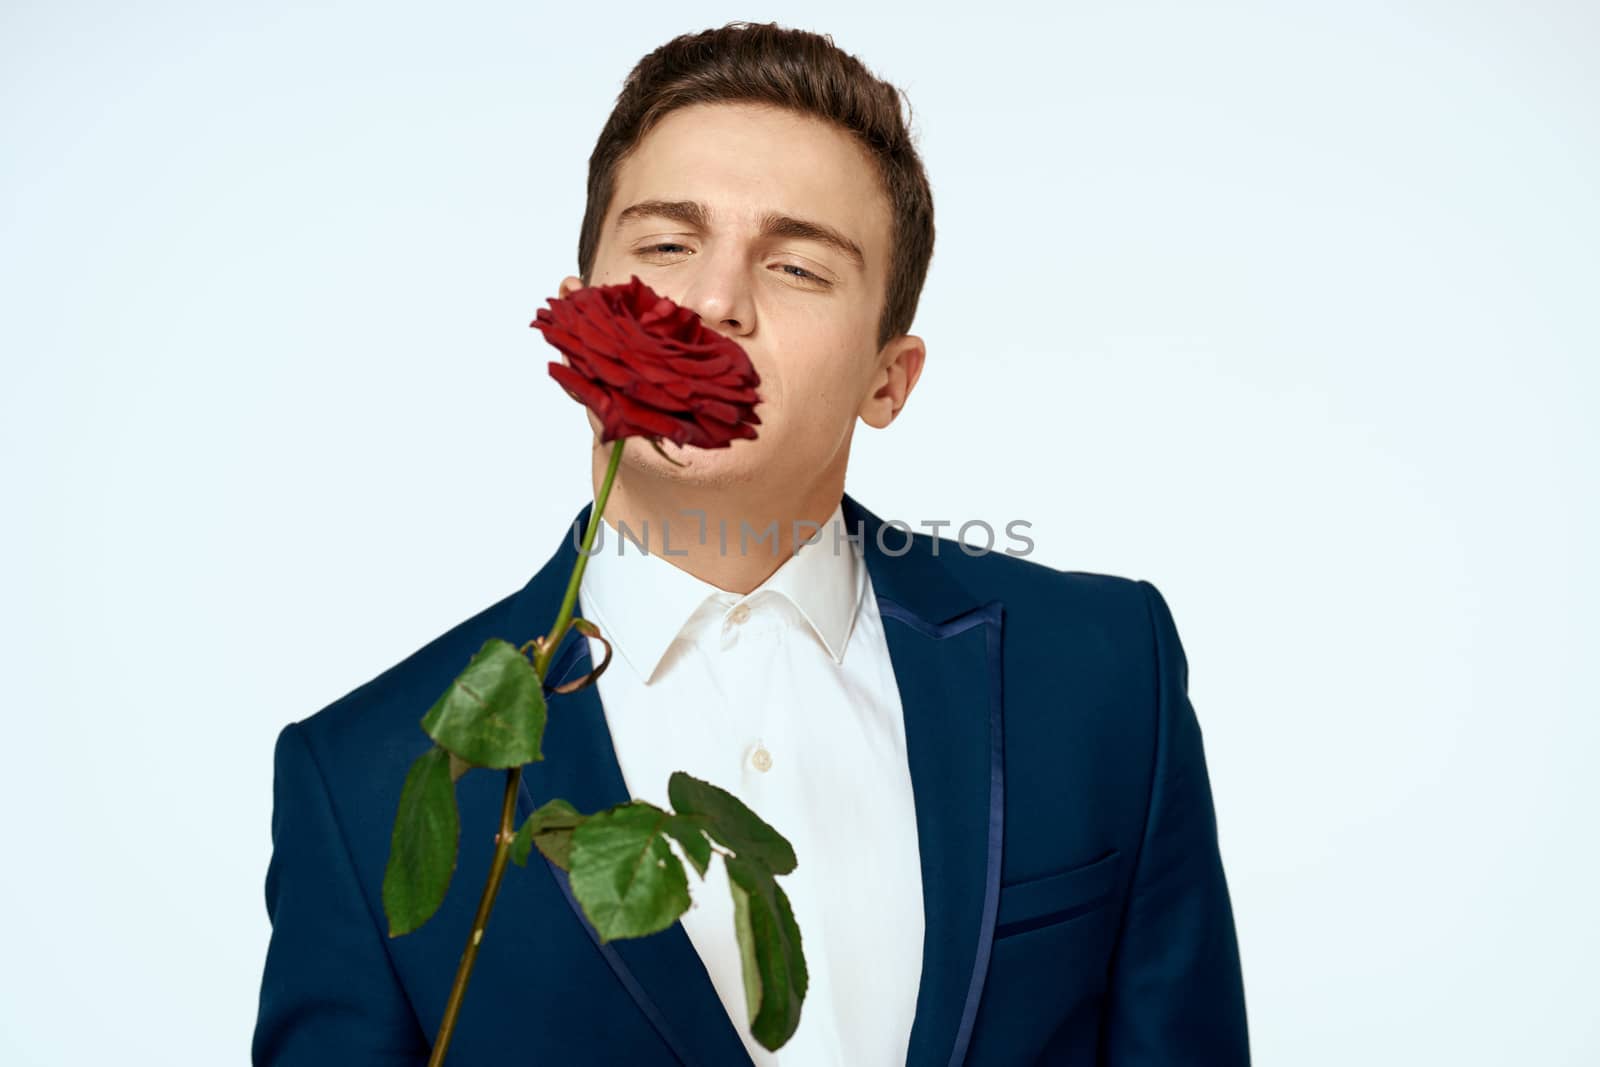 A man in a suit with a rose in his hands a gift date light background by SHOTPRIME